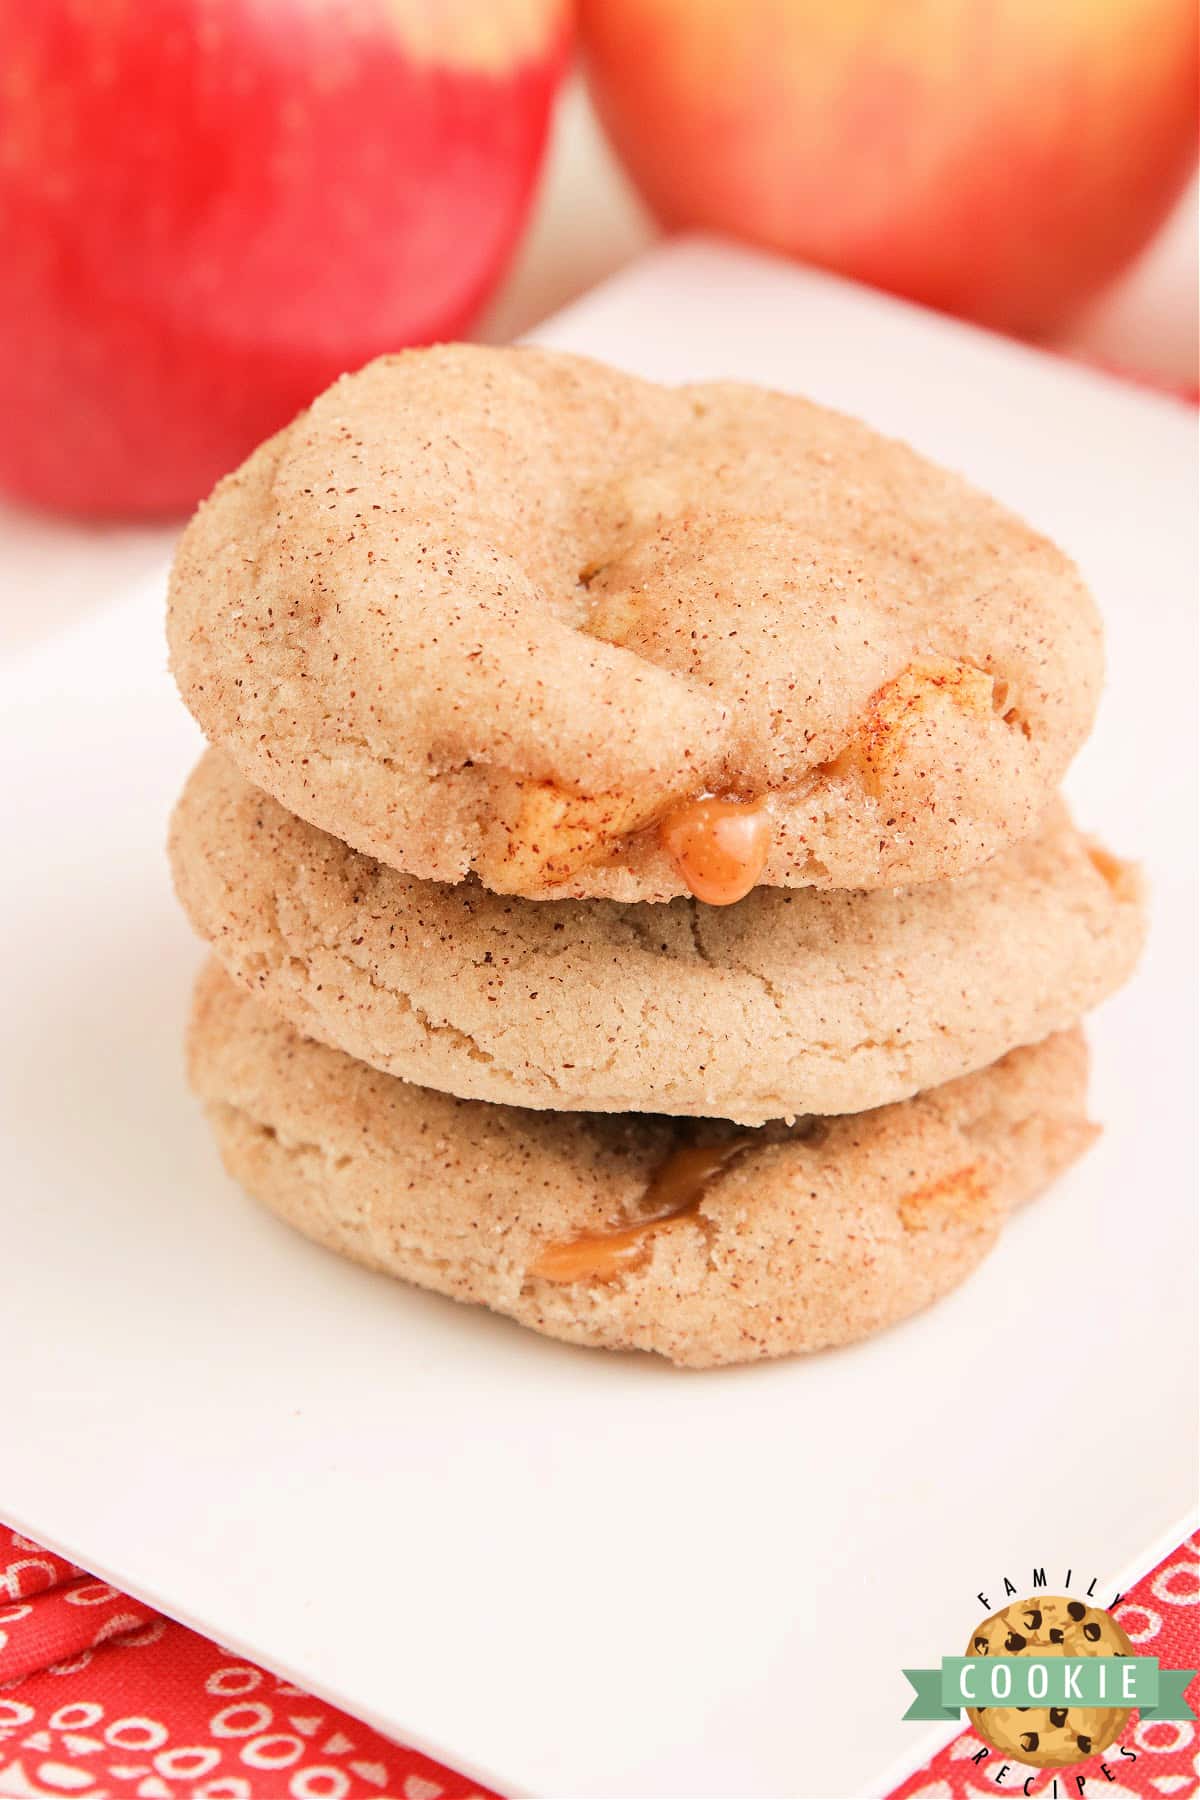 Snickerdoodle cookie recipe with caramel and apples